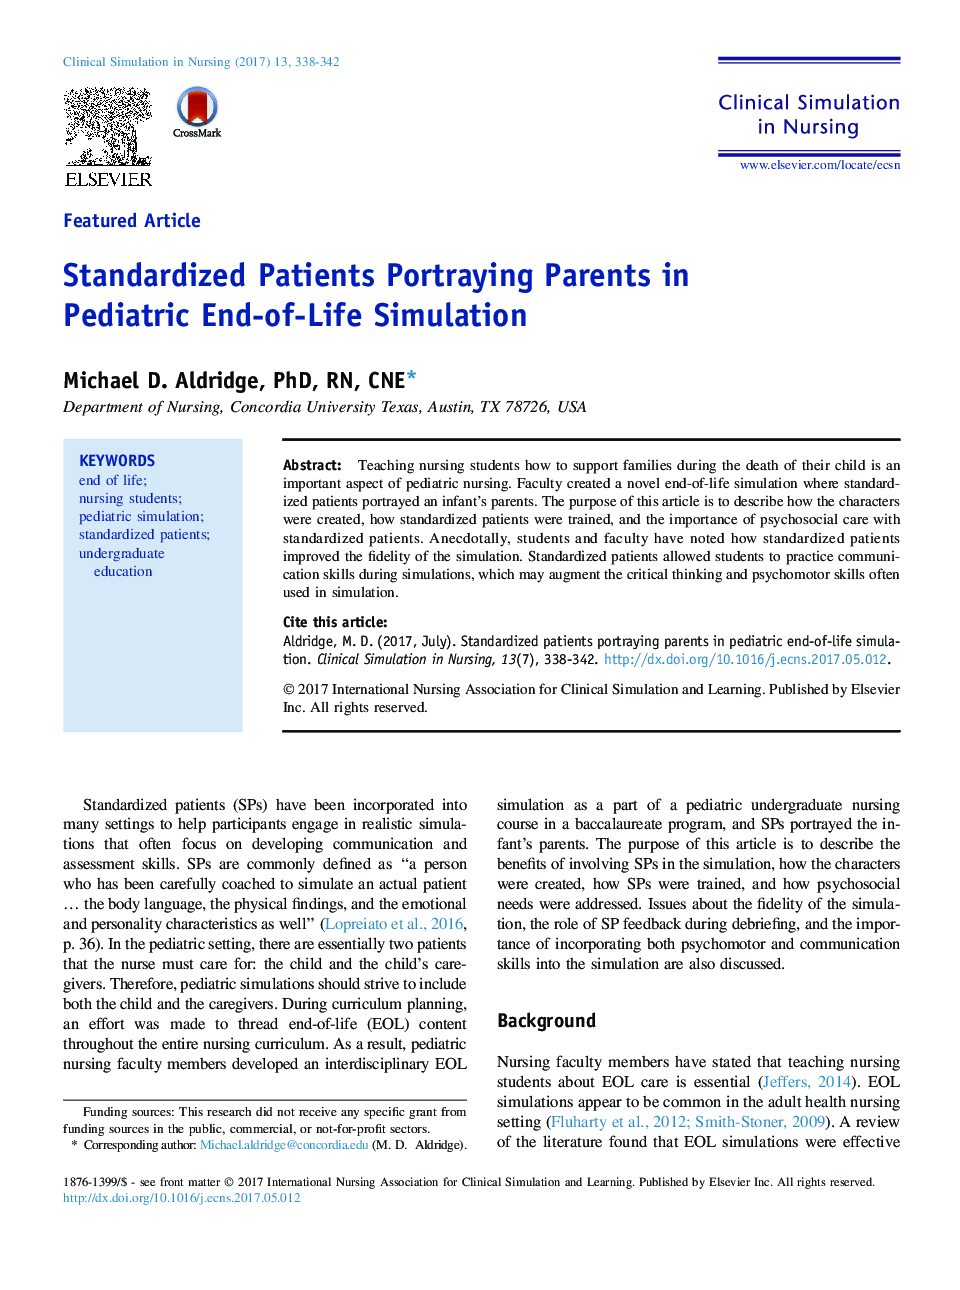 Standardized Patients Portraying Parents in Pediatric End-of-Life Simulation